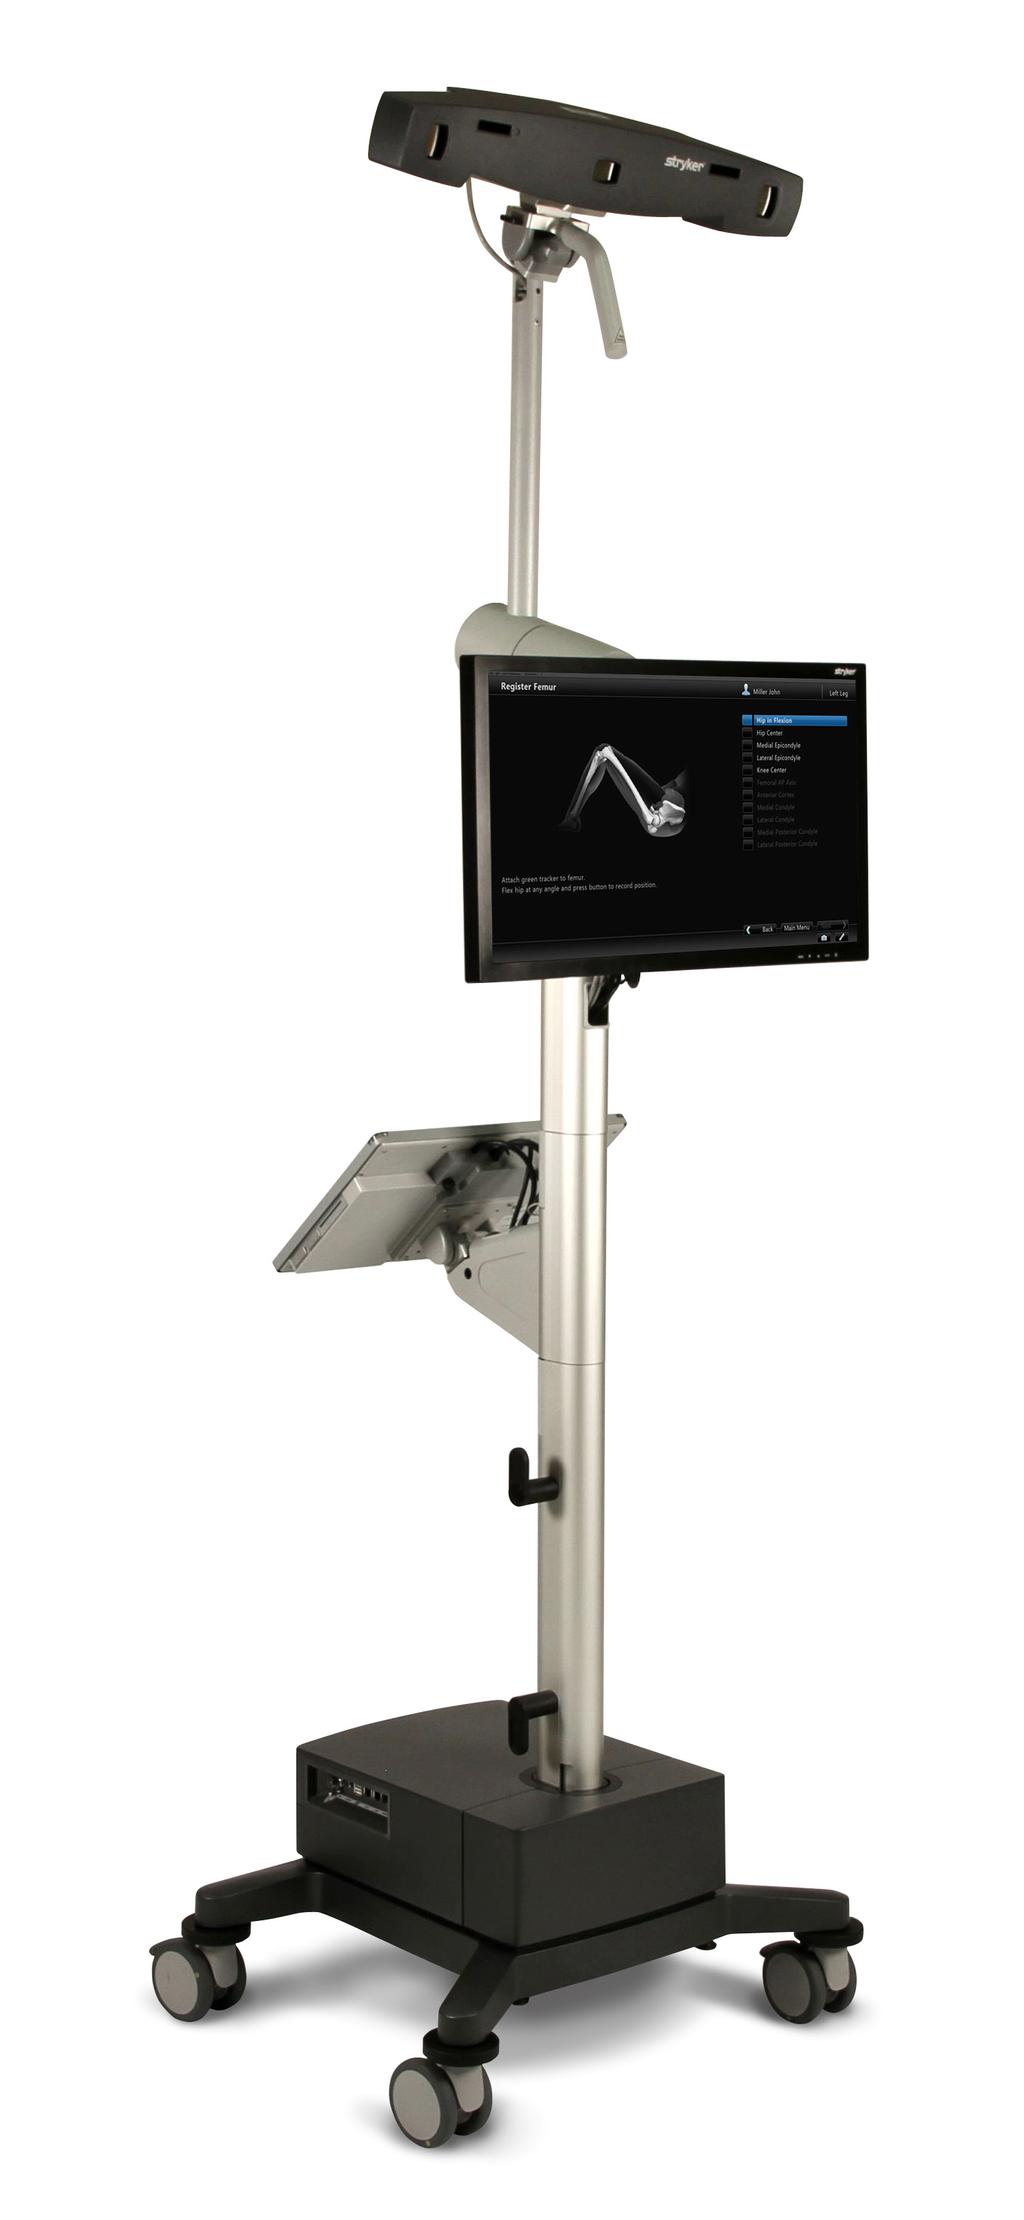 Product Guide 1 Introduction Introduction The Stryker OrthoMap Express Knee Navigation System is providing surgeons with a simplified solution helping to make navigated total knee replacements an